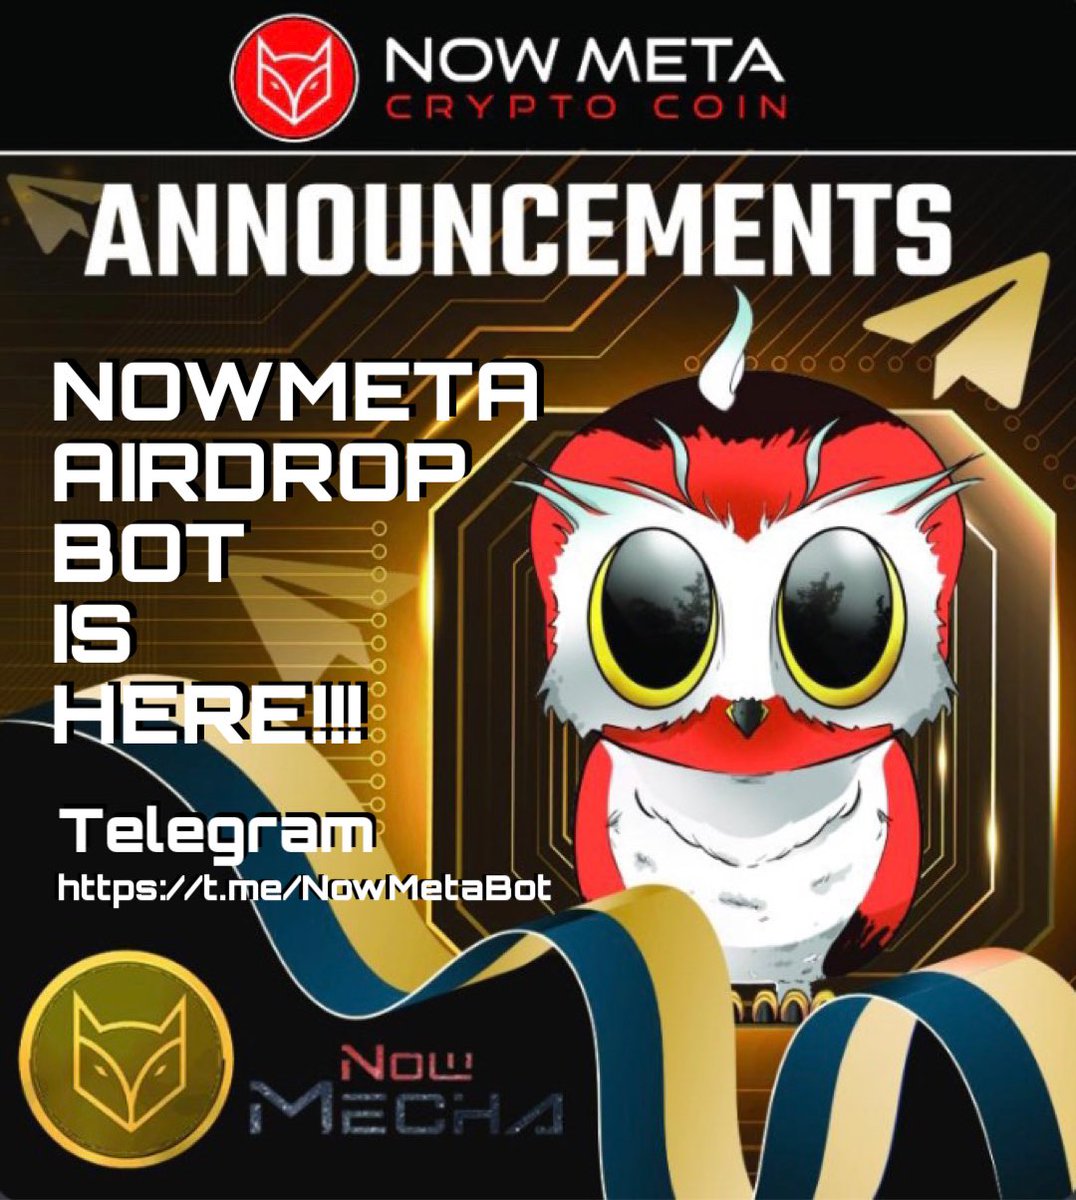 NOWMETA AIRDROP GIVEAWAY!!! NOWMETA will airdrop 10 luck winners! We will giveaway 10 Trillion NOWMETA TOKENS. Join our Telegram Group @https://t.me/NOWMETA comment telegram handle and MetaMask wallet. 1 Trillion Tokens to 10 lucky winners. Ready, Set, GO!!! #NOWMETA #NETERVERSE